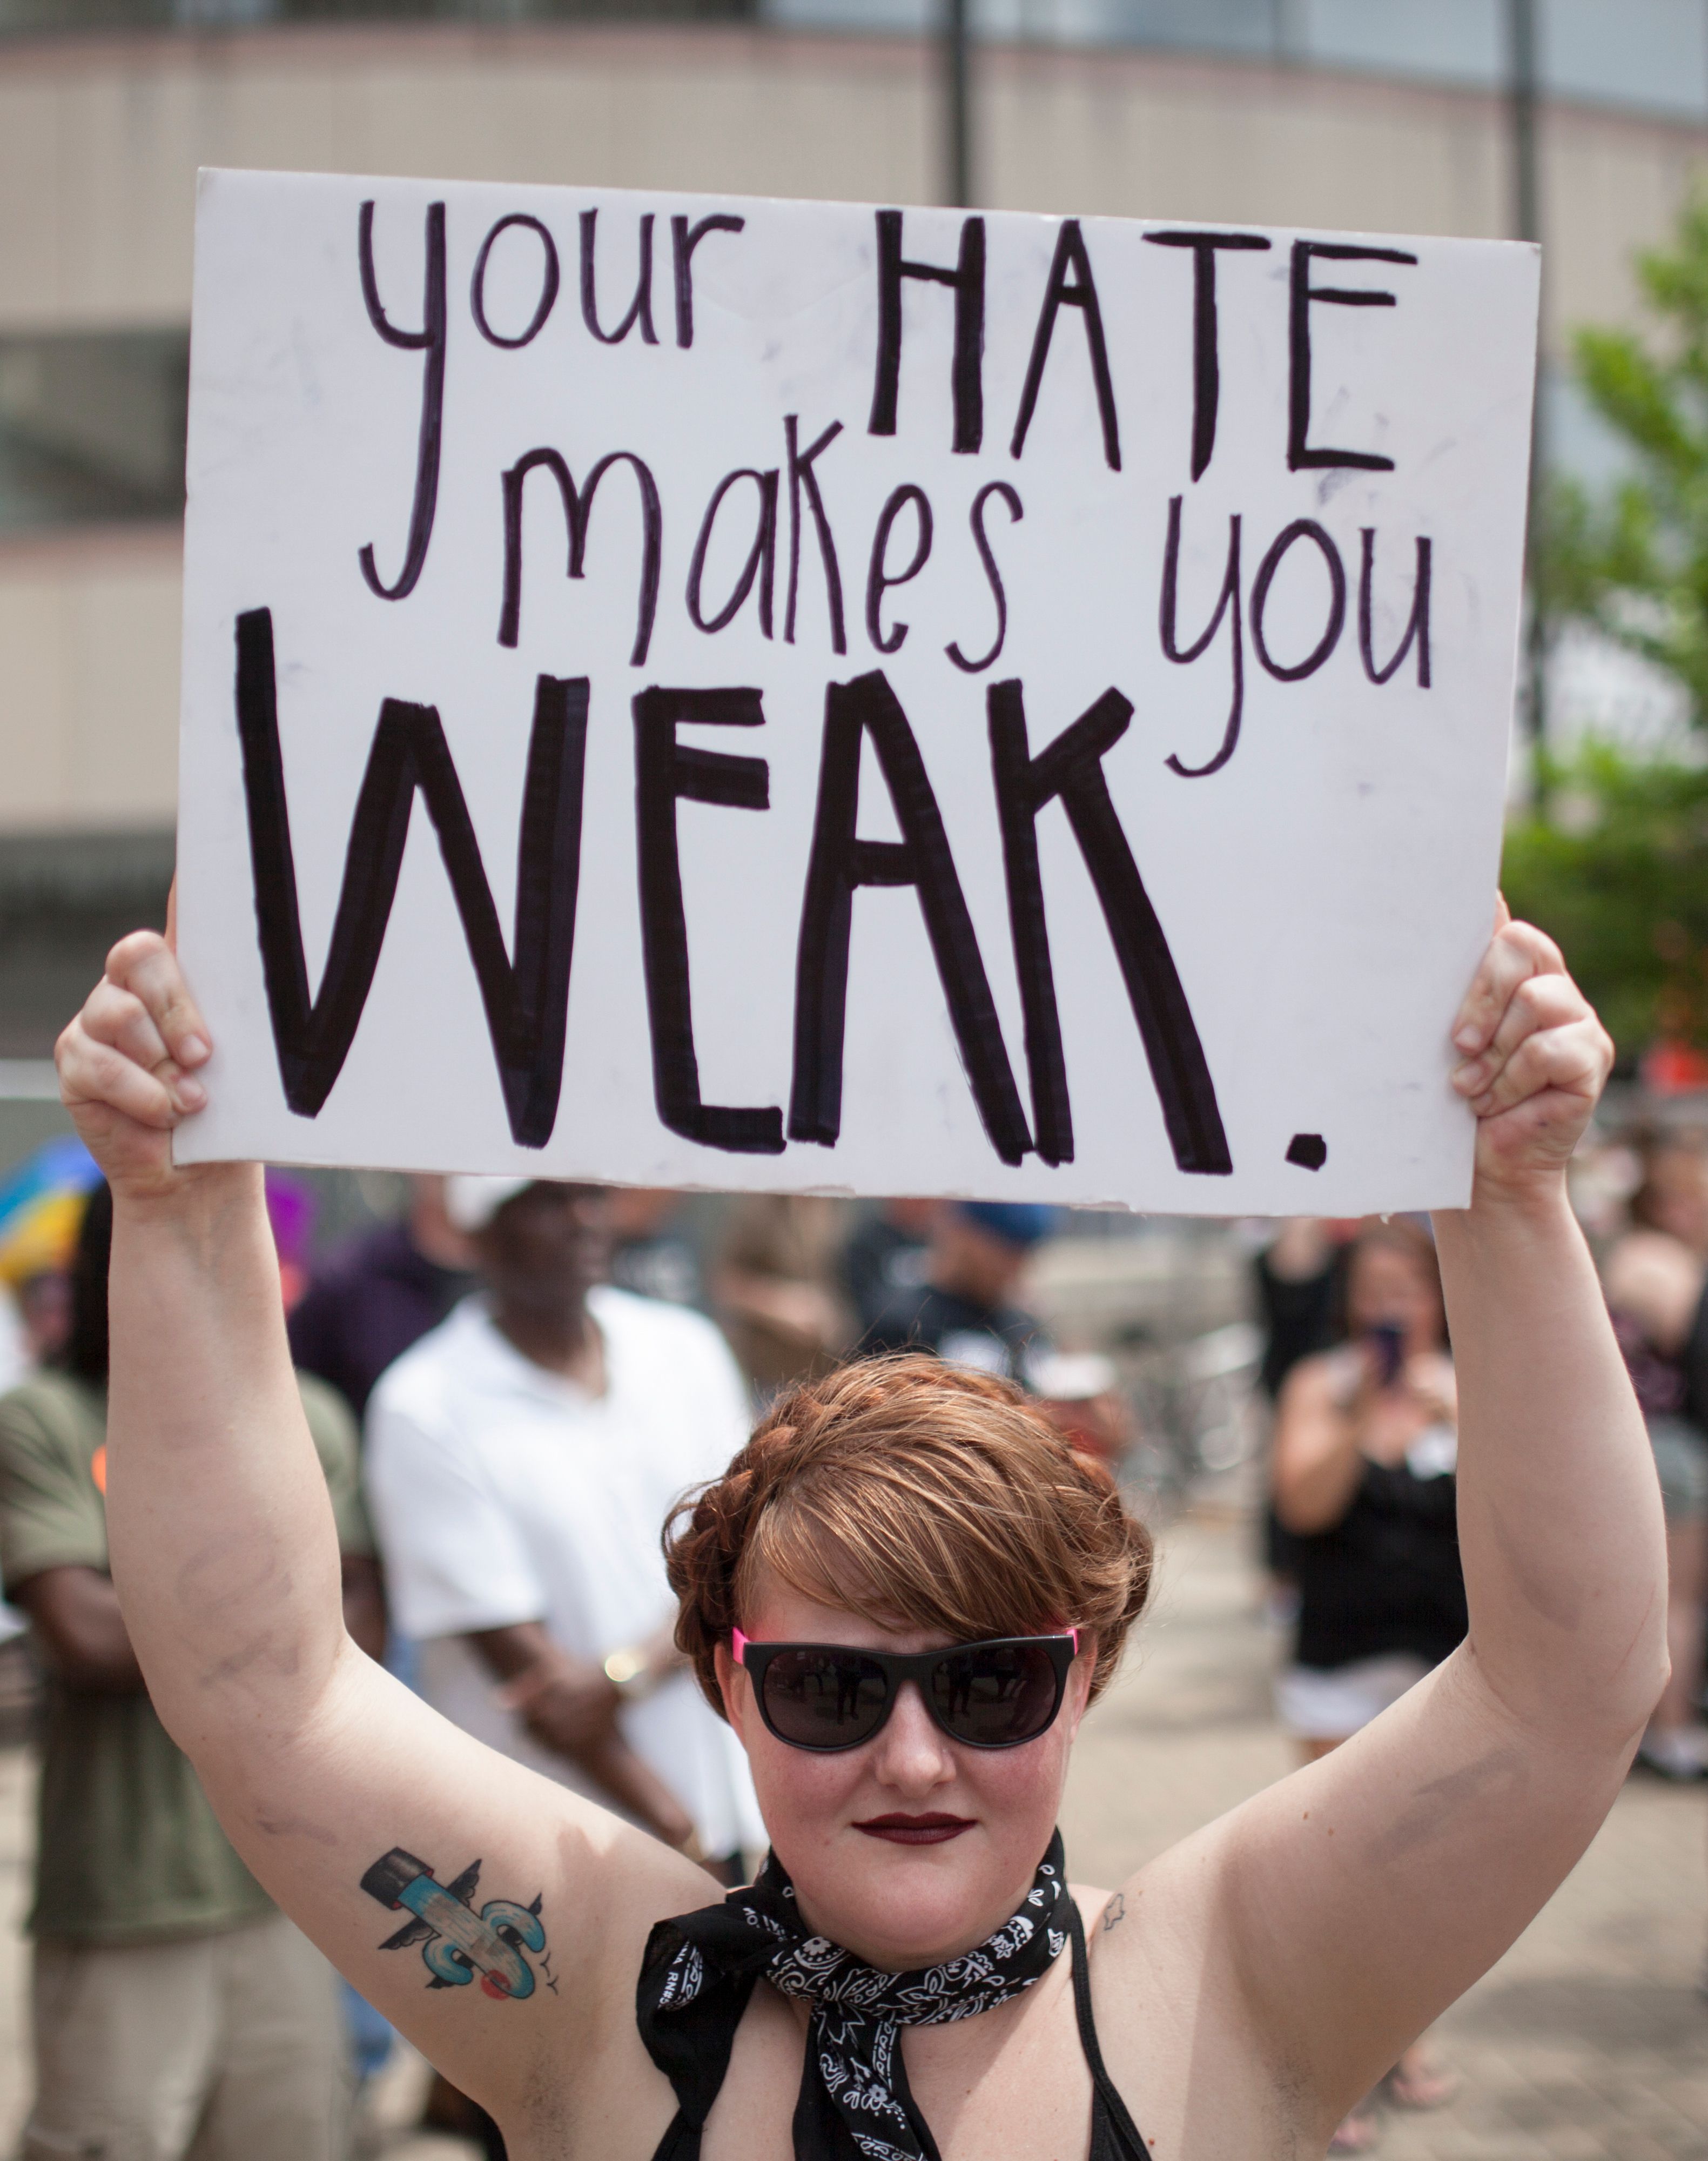 An anti-Klan protestor holds a sign at a small rally of a KKK-affiliated group that gathered in Dayton, Ohio, on May 25, 2019. (SETH HERALD—AFP/Getty Images)